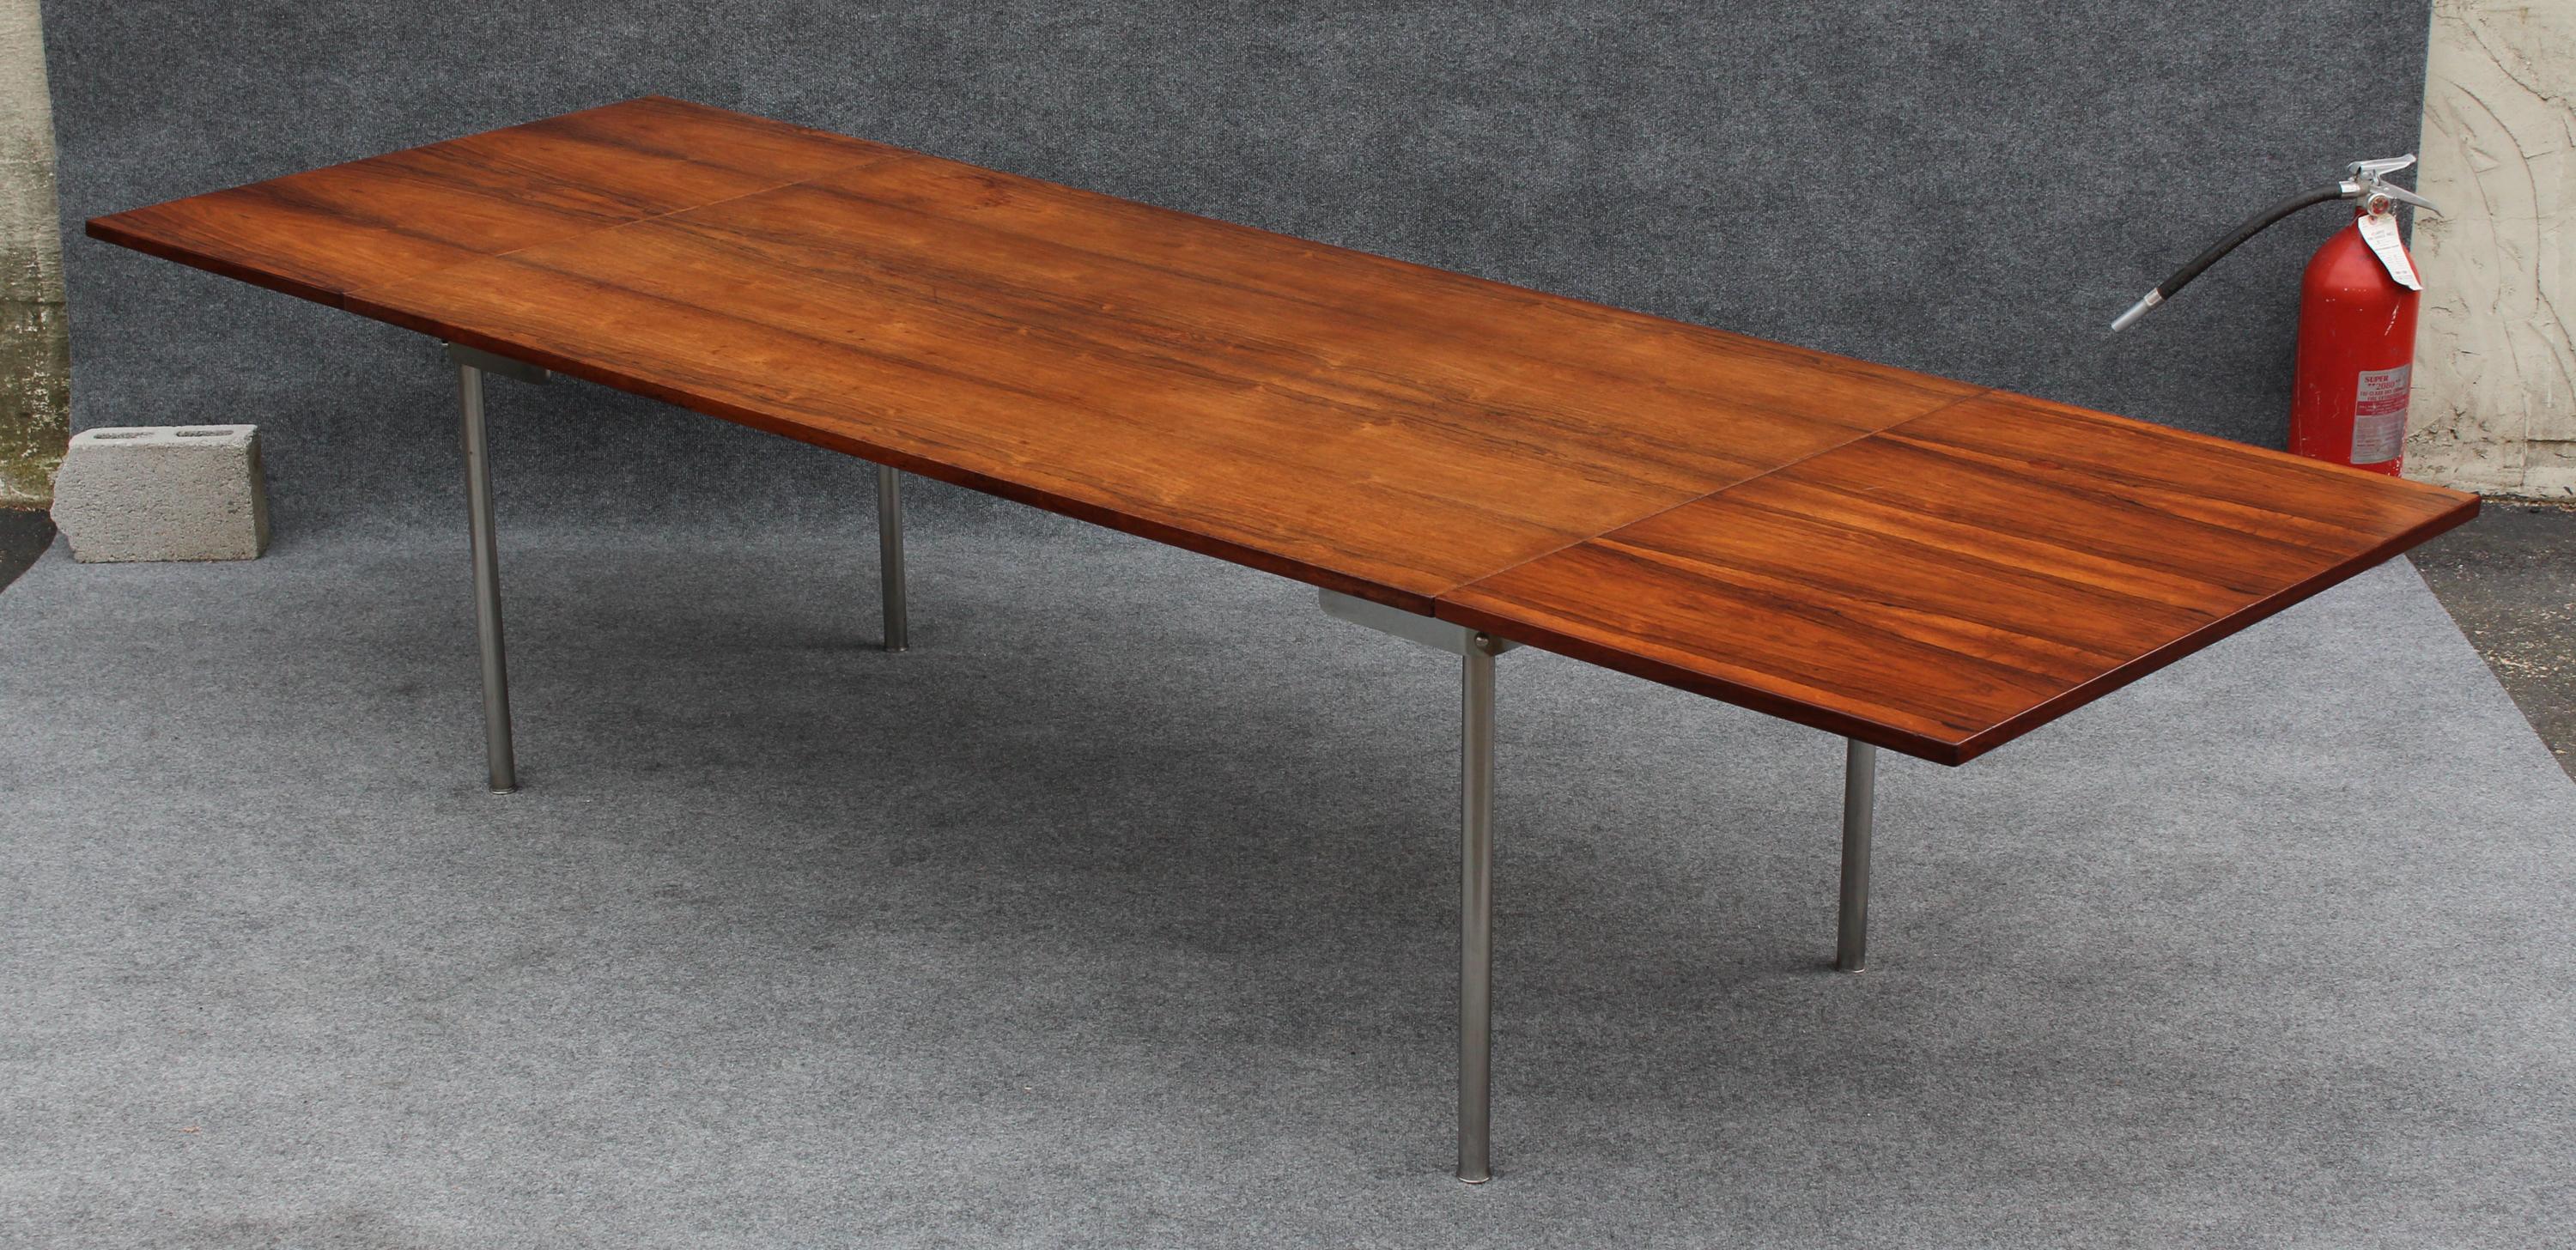 Restored Hans J. Wegner for Andreas Tuck AT-319 Drop-Leaf Rosewood Dining Table In Good Condition For Sale In Philadelphia, PA